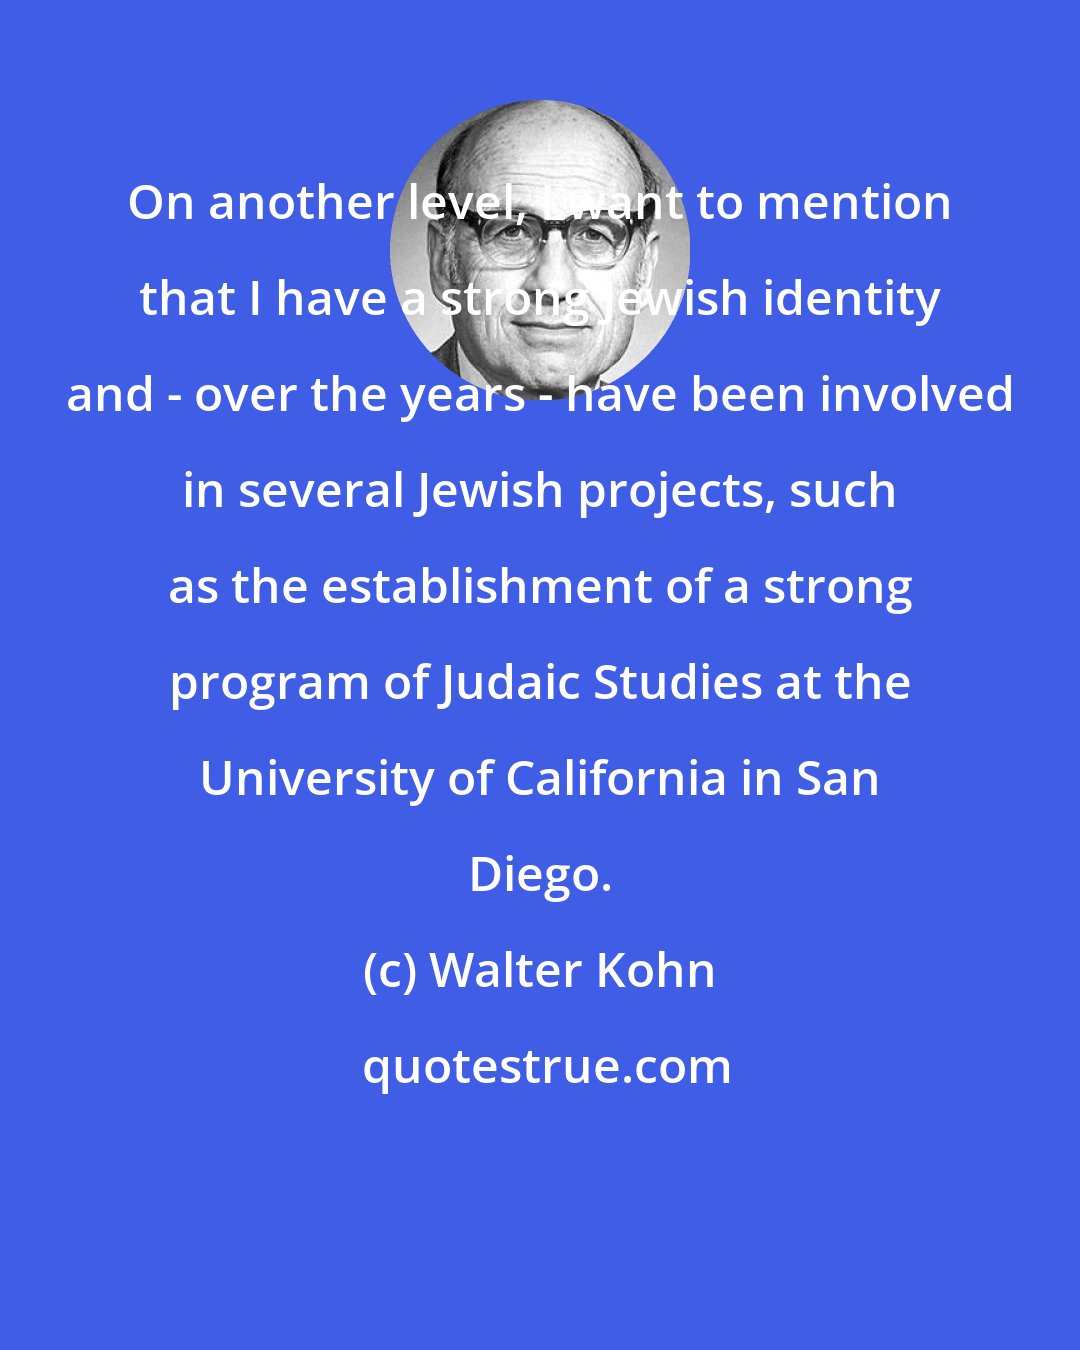 Walter Kohn: On another level, I want to mention that I have a strong Jewish identity and - over the years - have been involved in several Jewish projects, such as the establishment of a strong program of Judaic Studies at the University of California in San Diego.